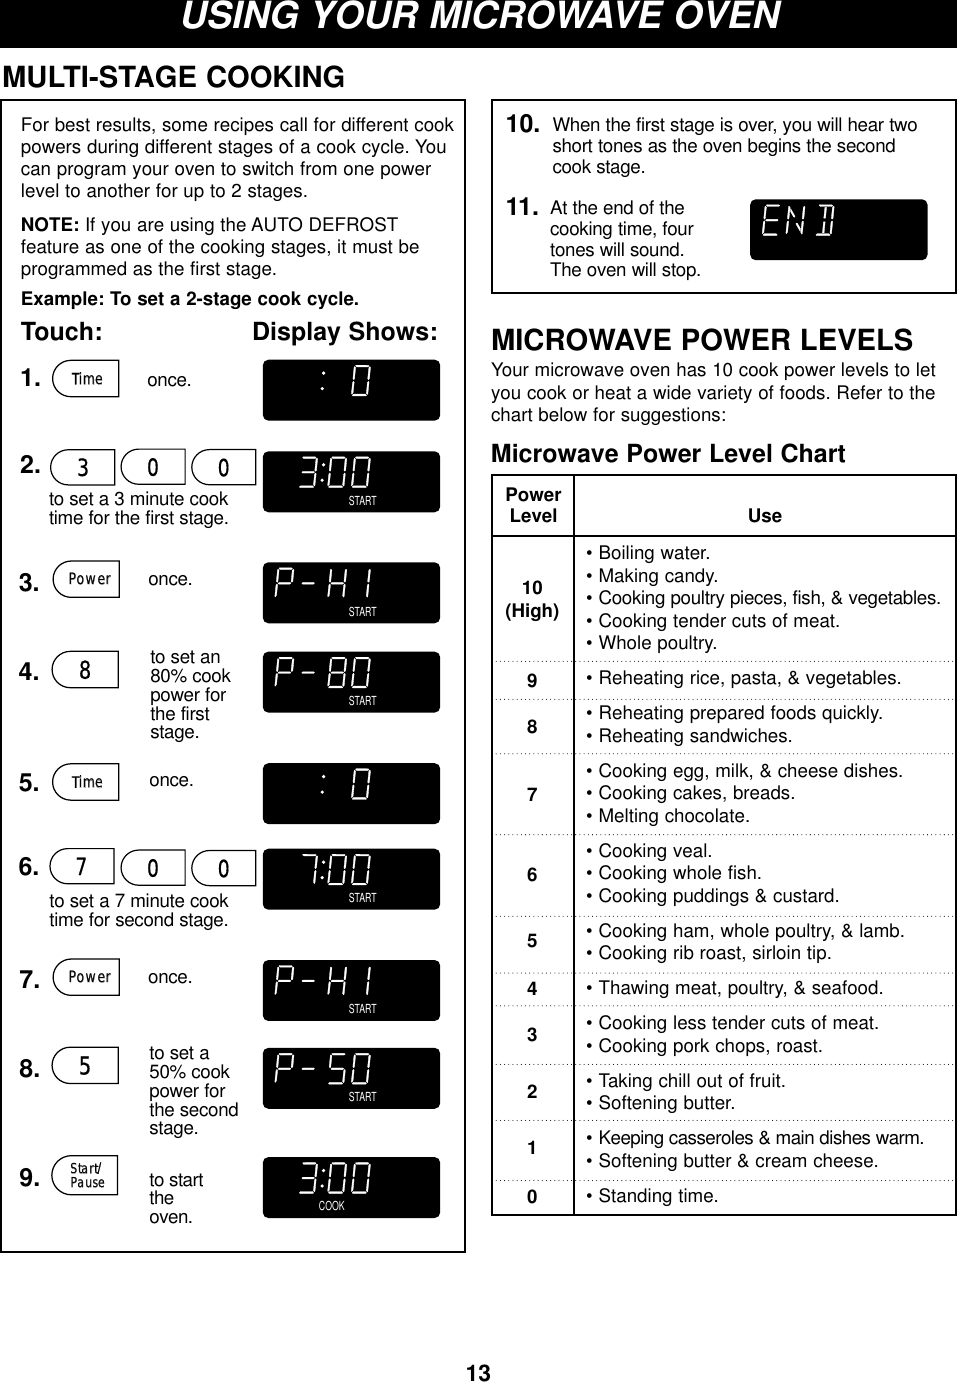 13USING YOUR MICROWAVE OVENMICROWAVE POWER LEVELSYour microwave oven has 10 cook power levels to letyou cook or heat a wide variety of foods. Refer to thechart below for suggestions:Microwave Power Level Chart•Boiling water.•Making candy.•Cooking poultry pieces, fish, &amp; vegetables.•Cooking tender cuts of meat.•Whole poultry.•Reheating rice, pasta, &amp; vegetables.•Reheating prepared foods quickly.•Reheating sandwiches.•Cooking egg, milk, &amp; cheese dishes.•Cooking cakes, breads.•Melting chocolate.•Cooking veal.•Cooking whole fish.•Cooking puddings &amp; custard.•Cooking ham, whole poultry, &amp; lamb.•Cooking rib roast, sirloin tip.•Thawing meat, poultry, &amp; seafood.•Cooking less tender cuts of meat.•Cooking pork chops, roast.•Taking chill out of fruit.•Softening butter.•Keeping casseroles &amp; main dishes warm.•Softening butter &amp; cream cheese.•Standing time.10(High)9876543210UsePowerLevelFor best results, some recipes call for different cookpowers during different stages of a cook cycle. Youcan program your oven to switch from one powerlevel to another for up to 2 stages.NOTE: If you are using the AUTO DEFROSTfeature as one of the cooking stages, it must be programmed as the first stage.Example: To set a 2-stage cook cycle.Touch: Display Shows:MULTI-STAGE COOKING1.2.5. once.once.3. once.4. to set an80% cookpower forthe firststage.to set a 3 minute cook time for the first stage.6.to set a 7 minute cook time for second stage.7. once.8. to set a50% cookpower forthe second stage.9.At the end of the cooking time, fourtones will sound.The oven will stop.to startthe oven.11.When the first stage is over, you will hear twoshort tones as the oven begins the secondcook stage.10.StarStart/PausePausePowerPowerPowerPower5TimeimeTimeimeCOOKDEFROST START AUTOLbsOZCUPKgSLICEPCSCOOKDEFROST AUTOLbsOZCUPKgSLICEPCSSTARTCOOKDEFROST AUTOLbsOZCUPKgSLICEPCSSTARTCOOKDEFROST AUTOLbsOZCUPKgSLICEPCSSTARTCOOKDEFROST AUTOLbsOZCUPKgSLICEPCSSTARTCOOKDEFROST AUTOLbsOZCUPKgSLICEPCSSTARTCOOKDEFROST AUTOLbsOZCUPKgSLICEPCSSTARTSTARTDEFROST AUTOLbsOZCUPKgSLICEPCSCOOK8300700DEFROST COOK START AUTOLbsOZCUPKgSLICEPCSDEFROST COOK START AUTOLbsOZCUPKgSLICEPCS